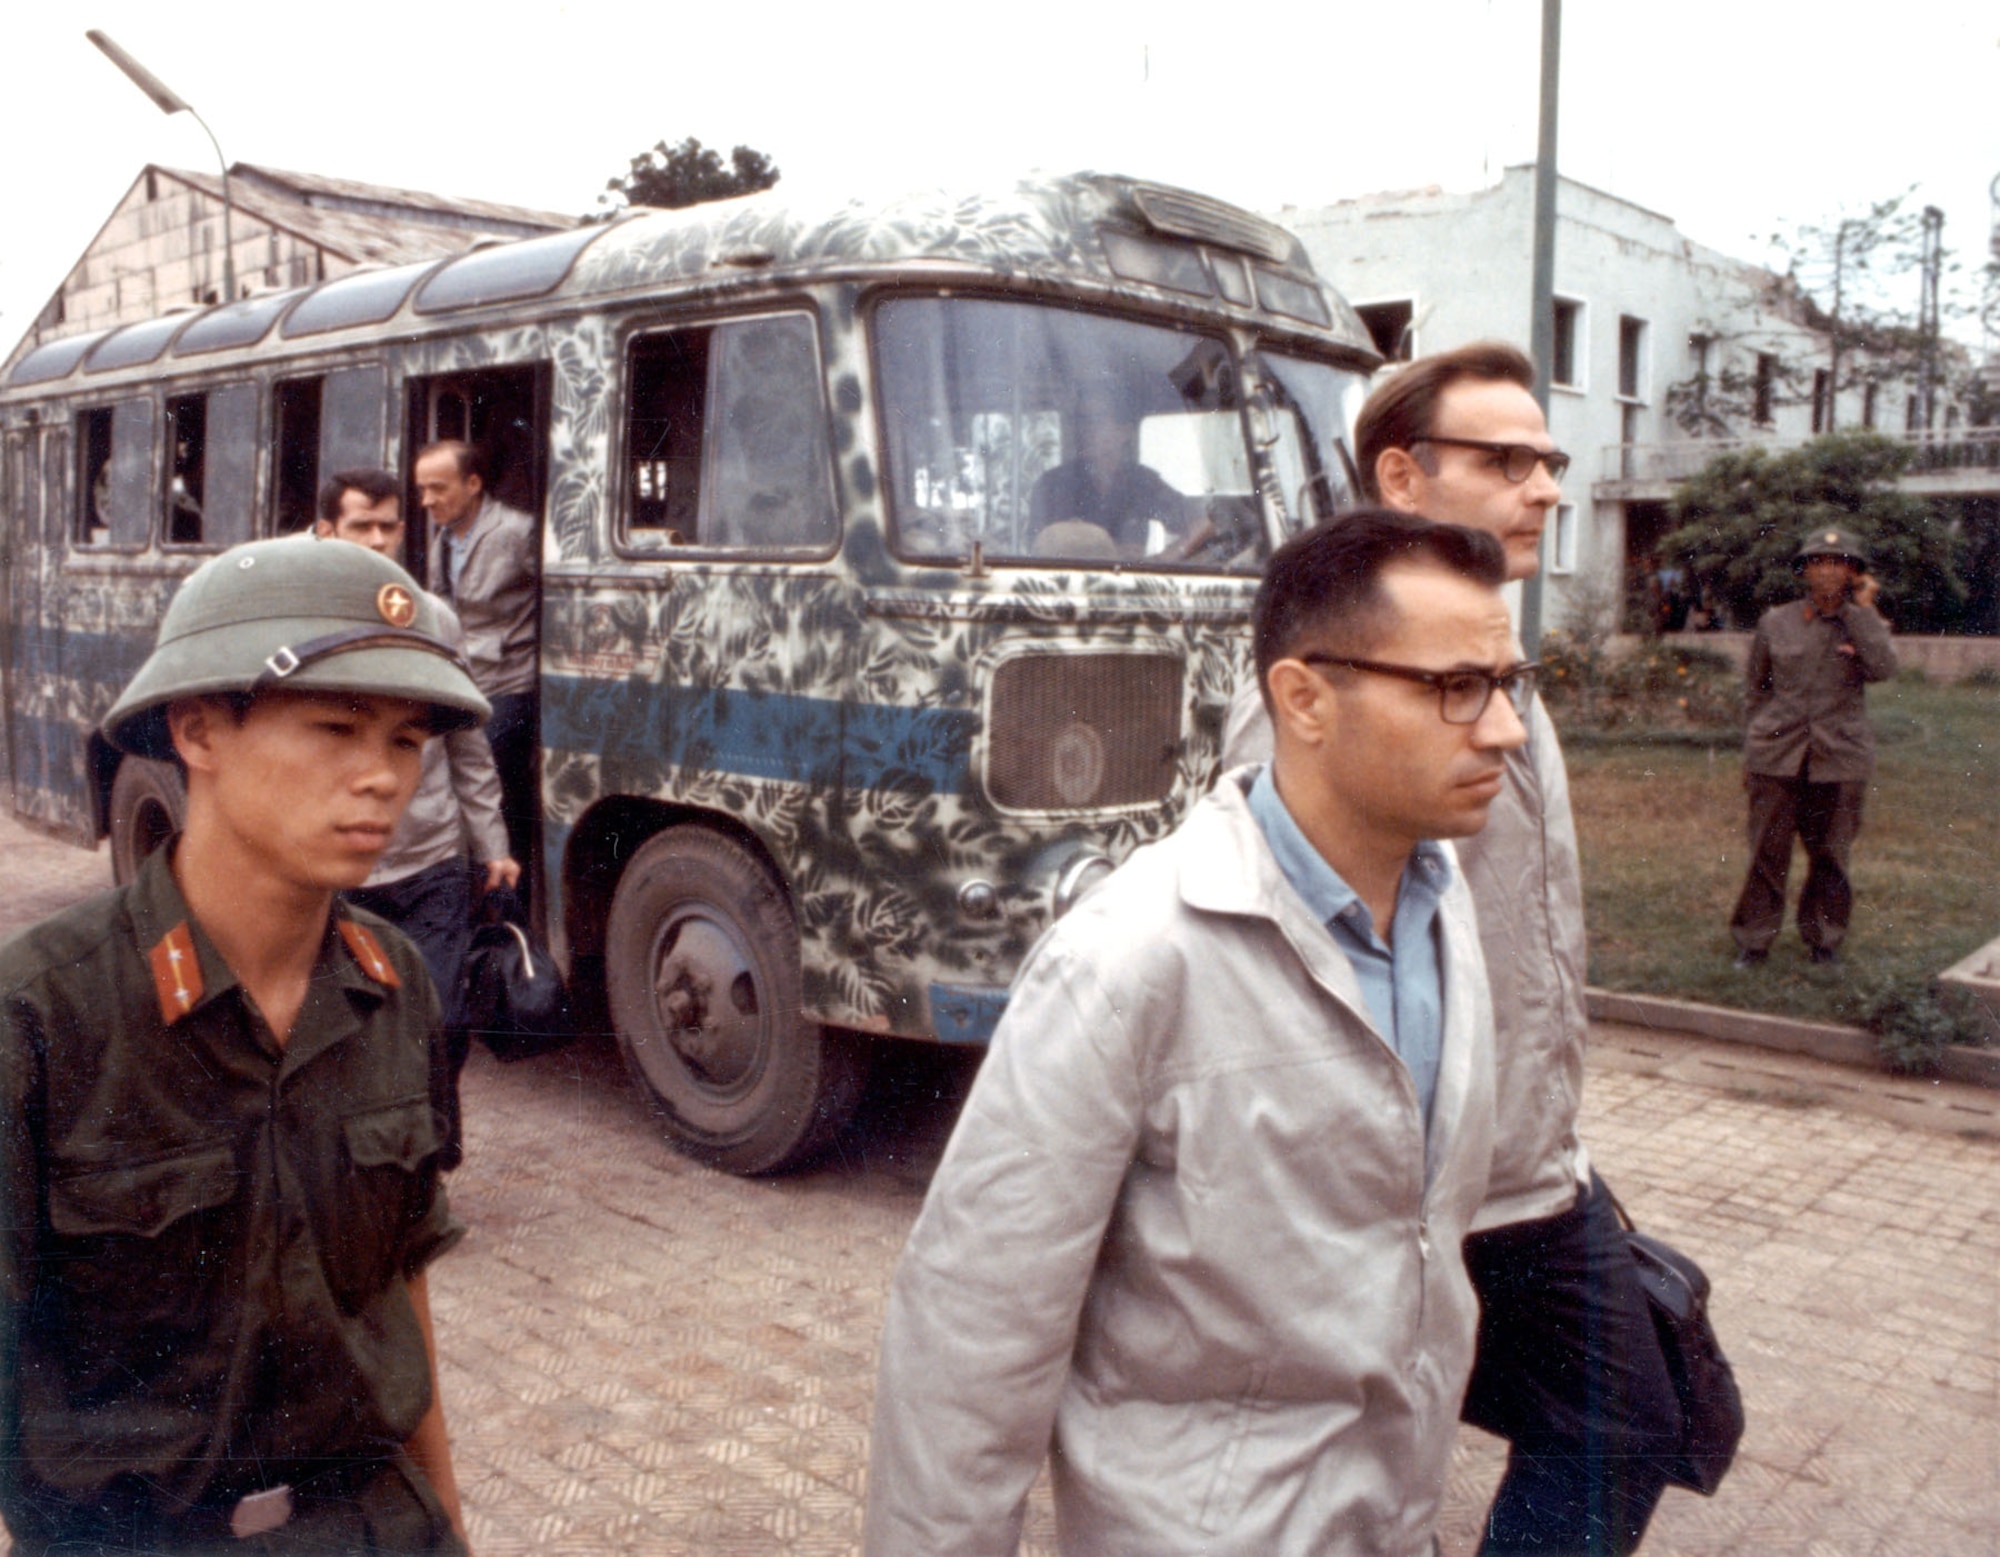 POWs were driven to Hanoi’s Gia Lam Airport in buses for release. (U.S. Air Force photo)